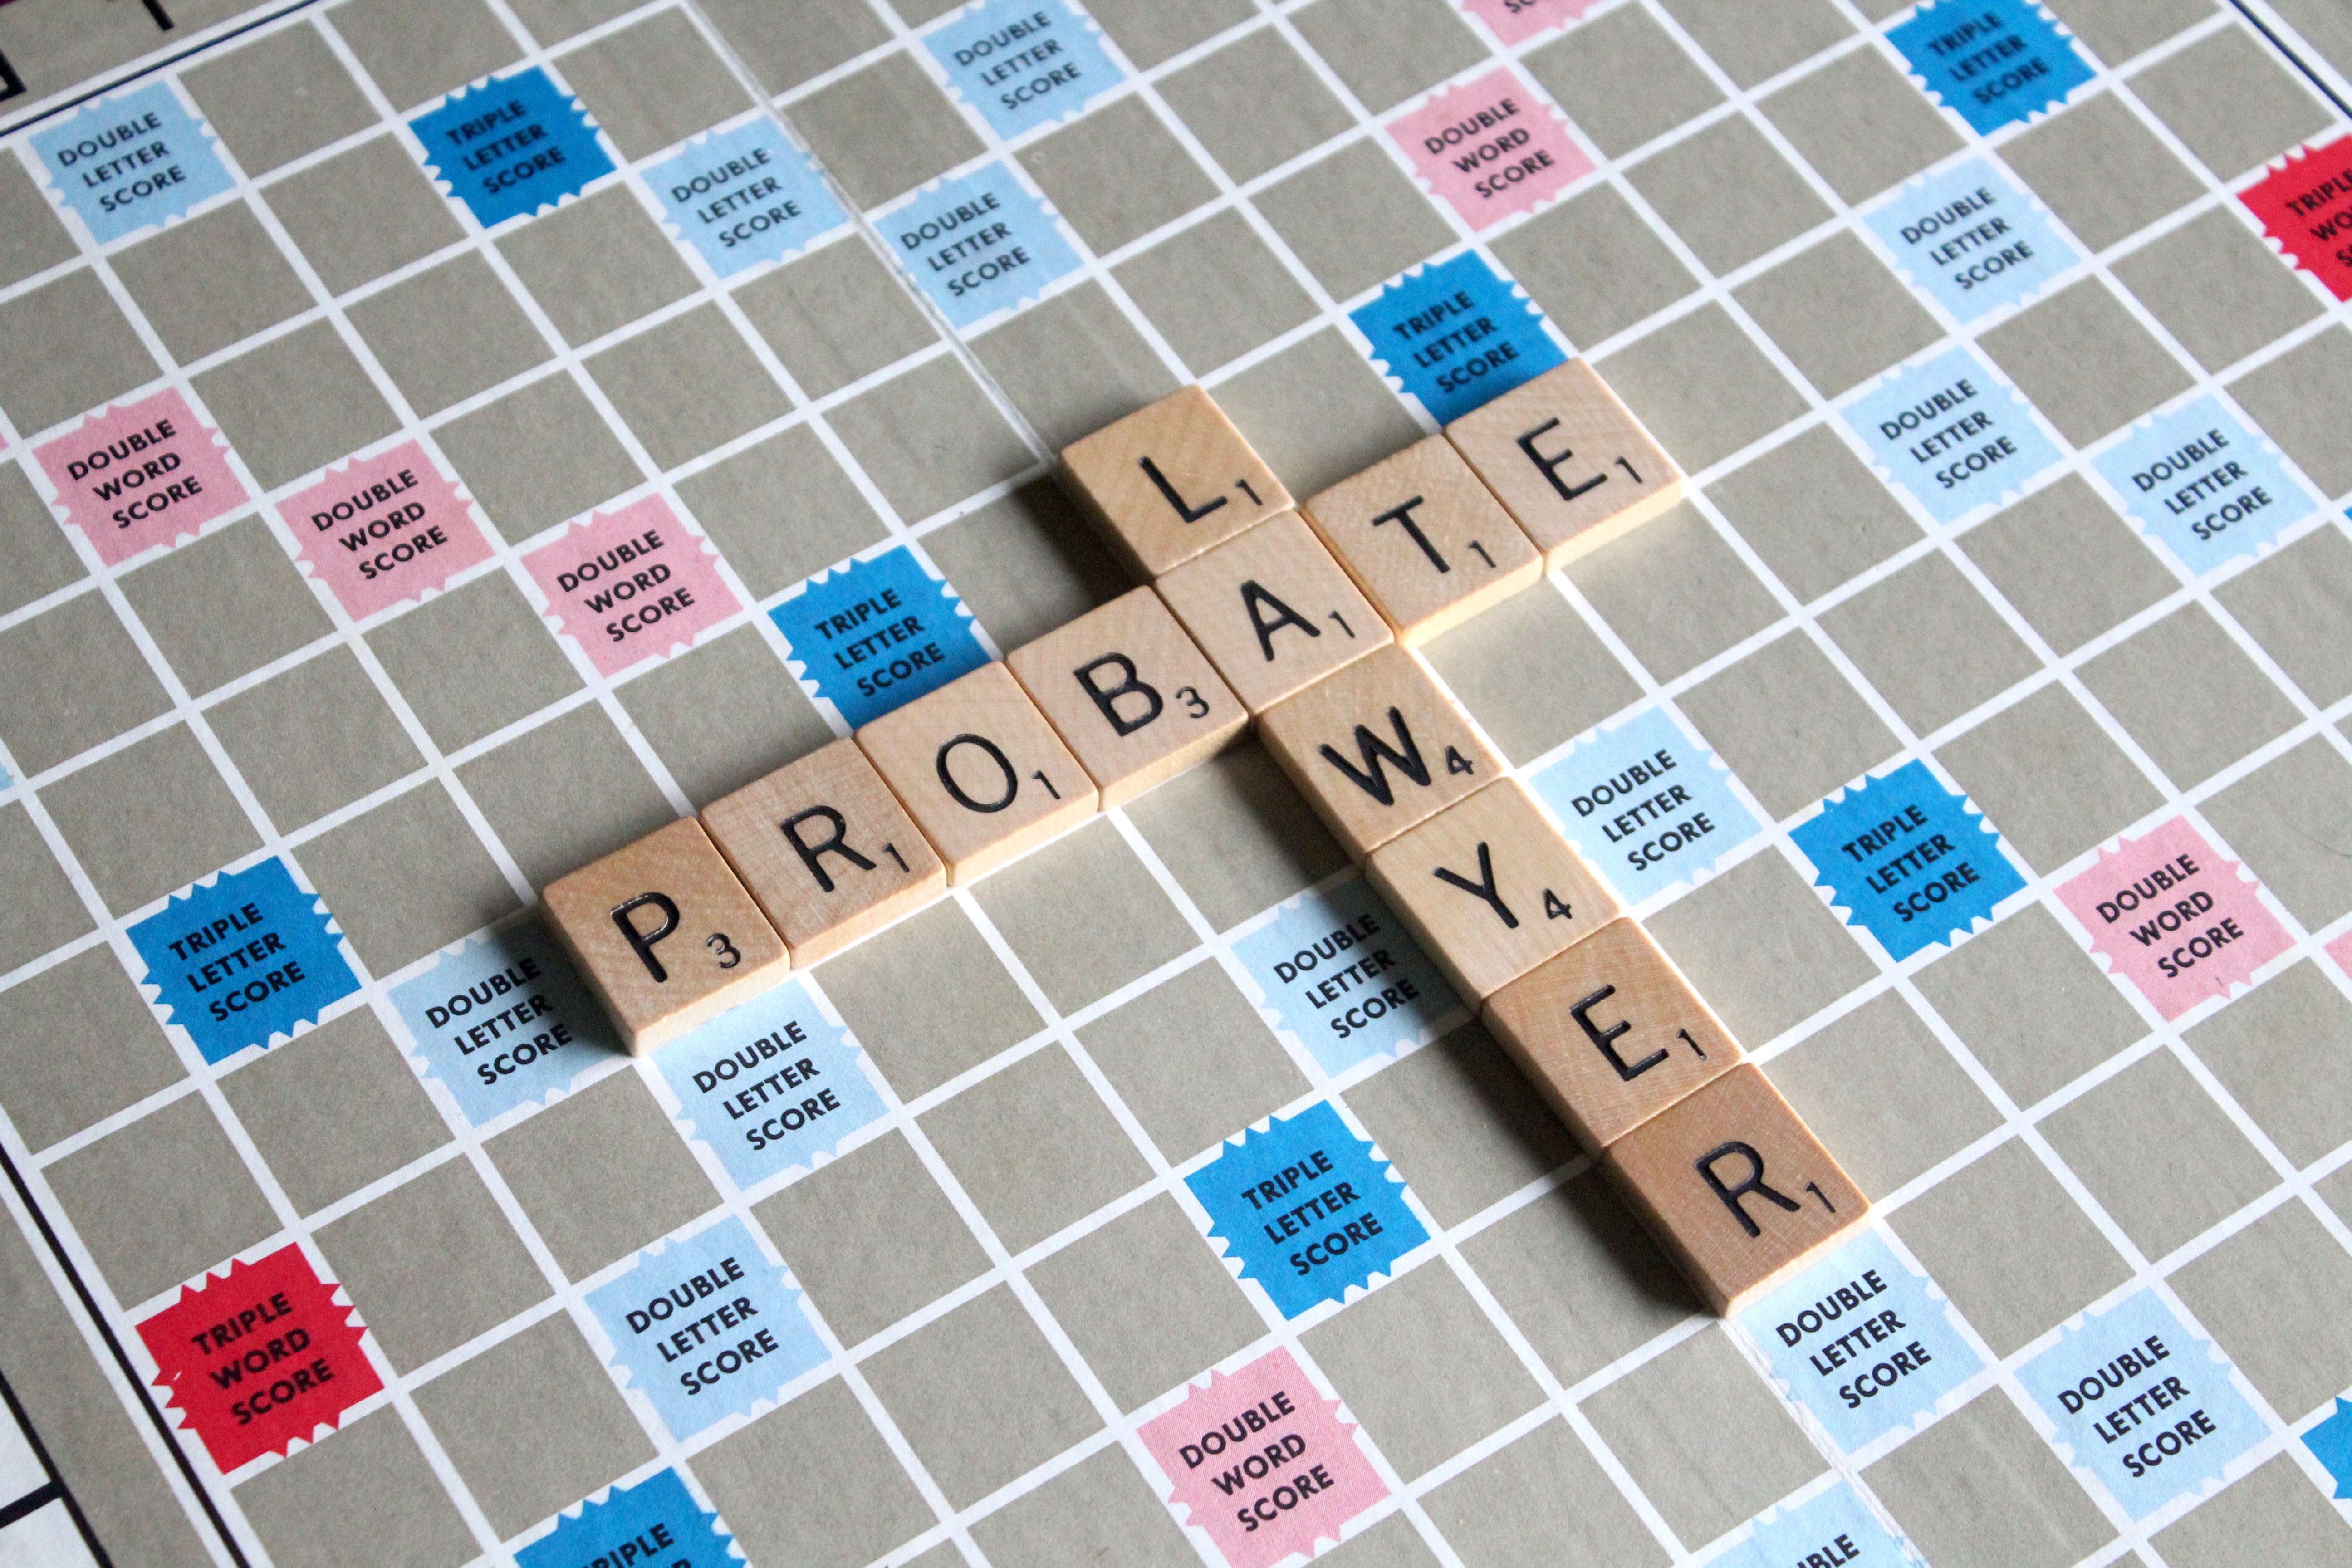 Scrabble game with lawyer and probate words; image by Melinda Gimpel, via Unsplash.com.